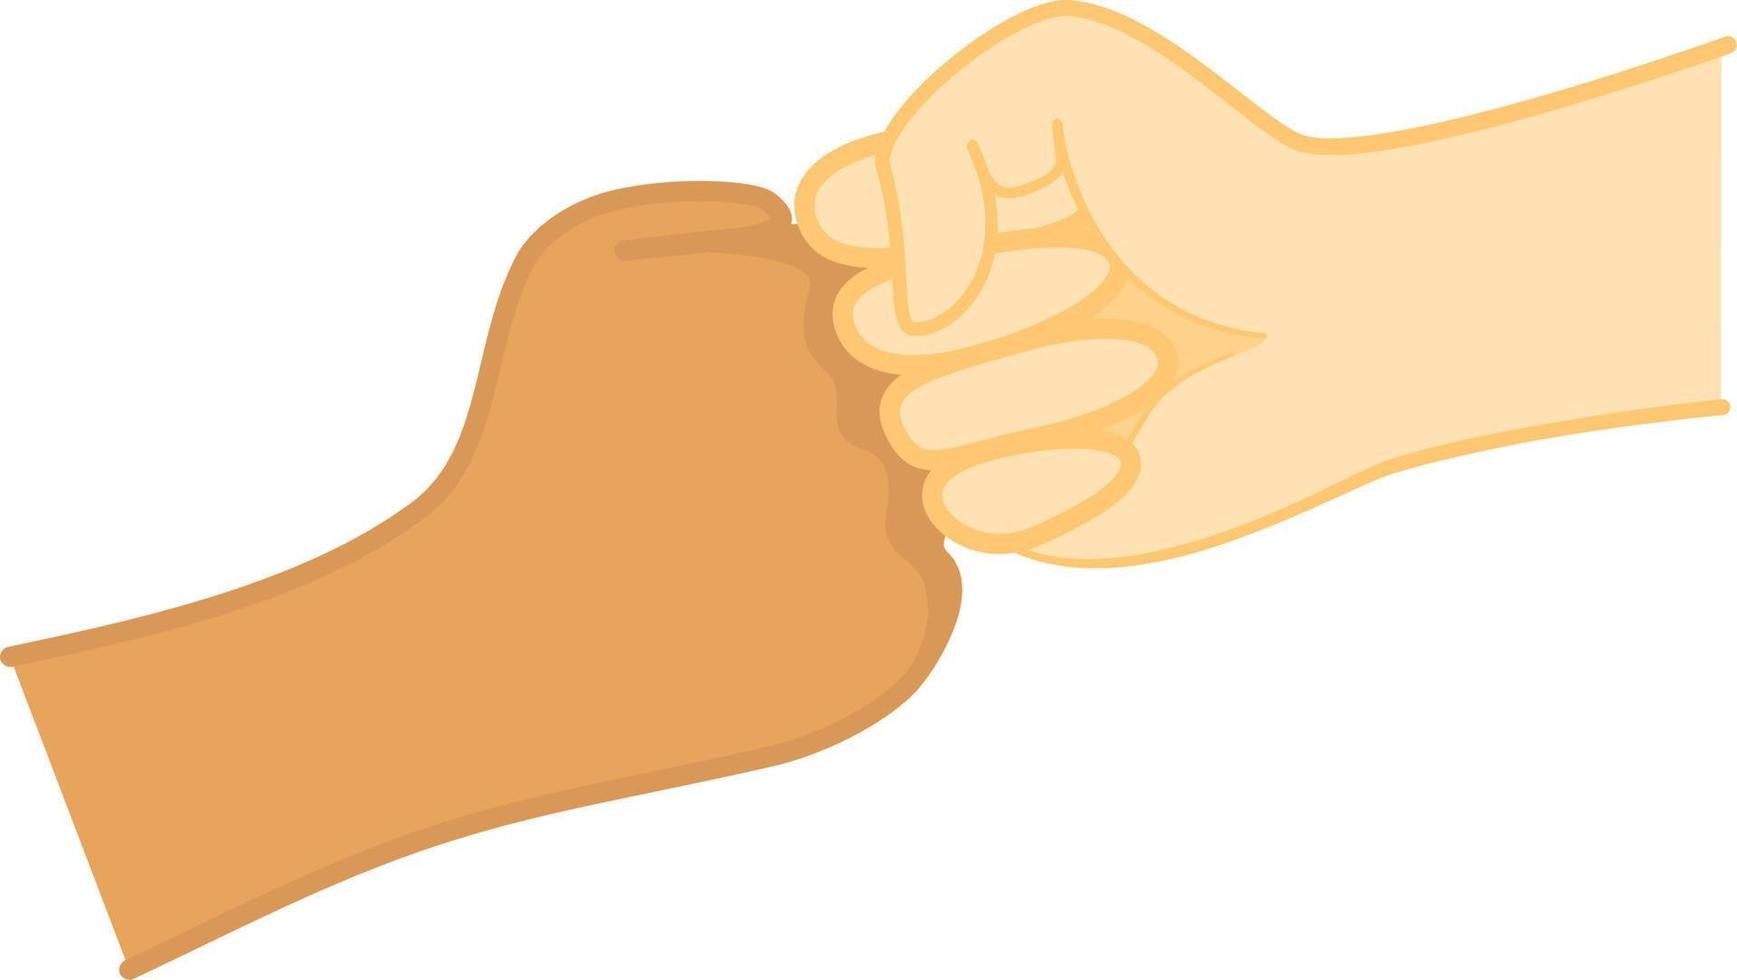 Greeting hands gesture. Friendly bump of clenched man fists against each other. Concept of teamwork, partnership and friendship. Vector illustration.